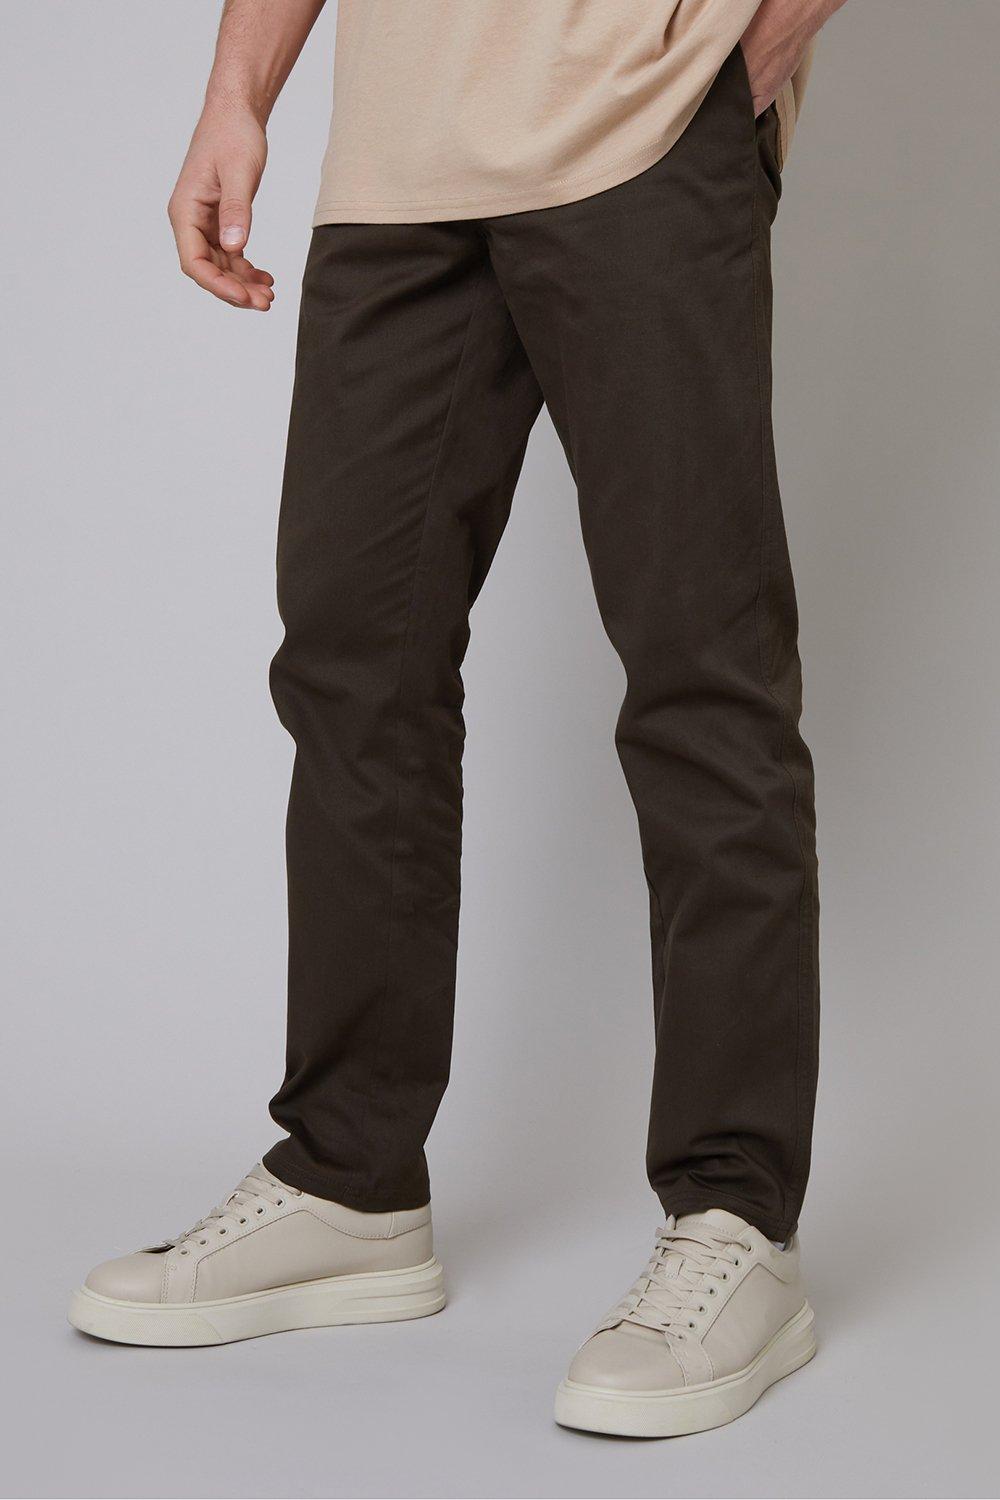 'Laurito' Cotton Regular Fit Chino Trousers with Stretch